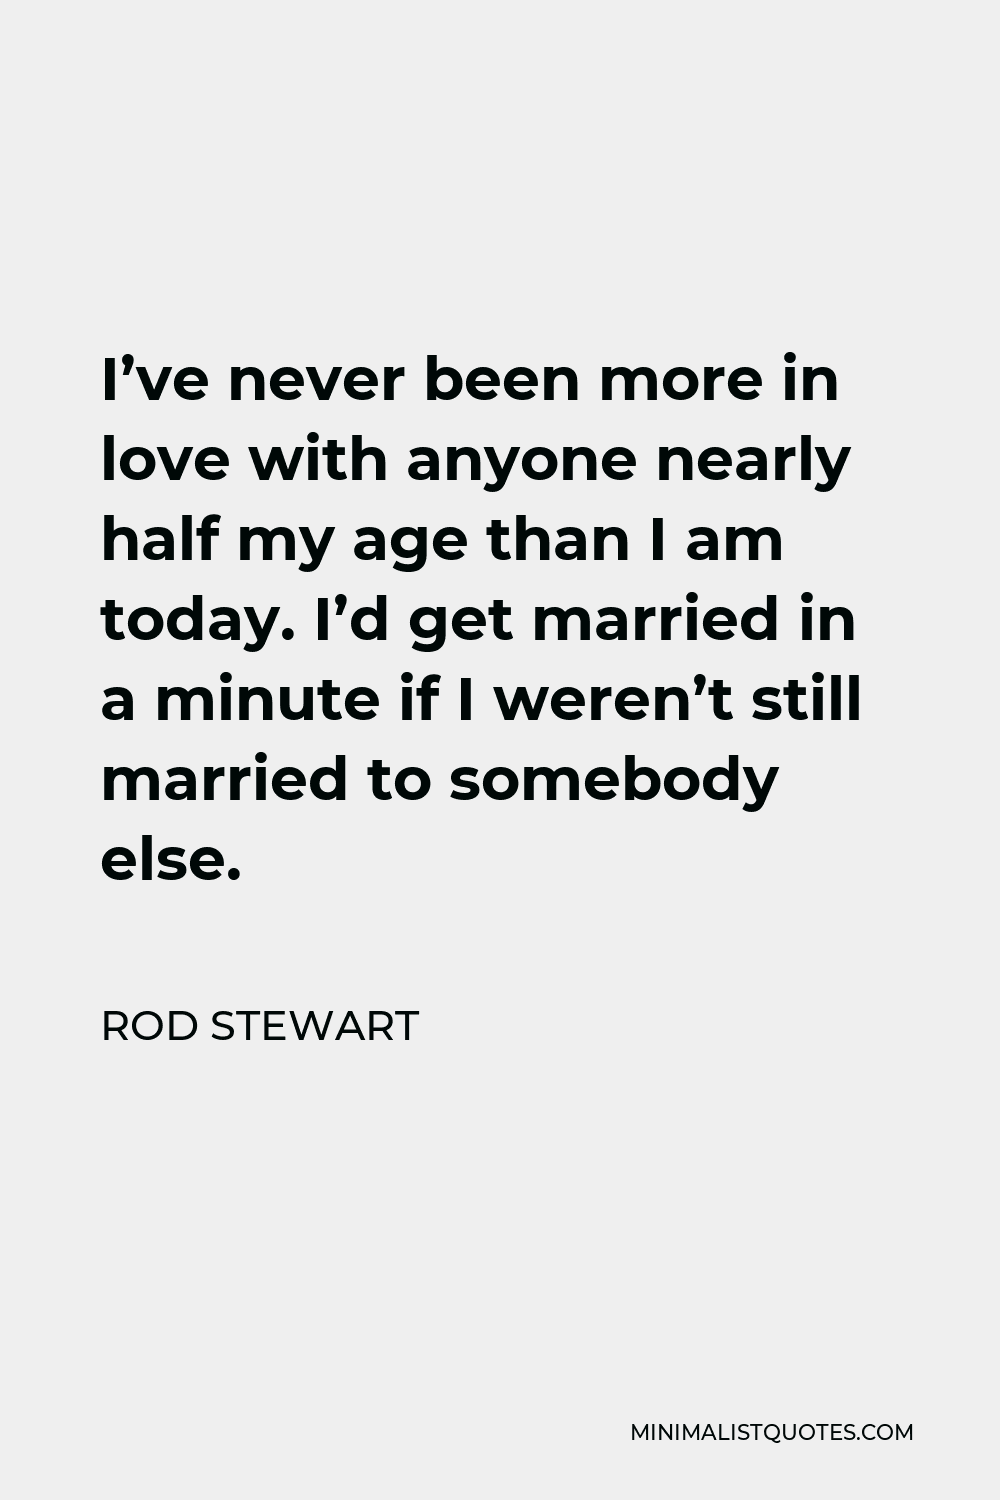 Rod Stewart Quote - I’ve never been more in love with anyone nearly half my age than I am today. I’d get married in a minute if I weren’t still married to somebody else.